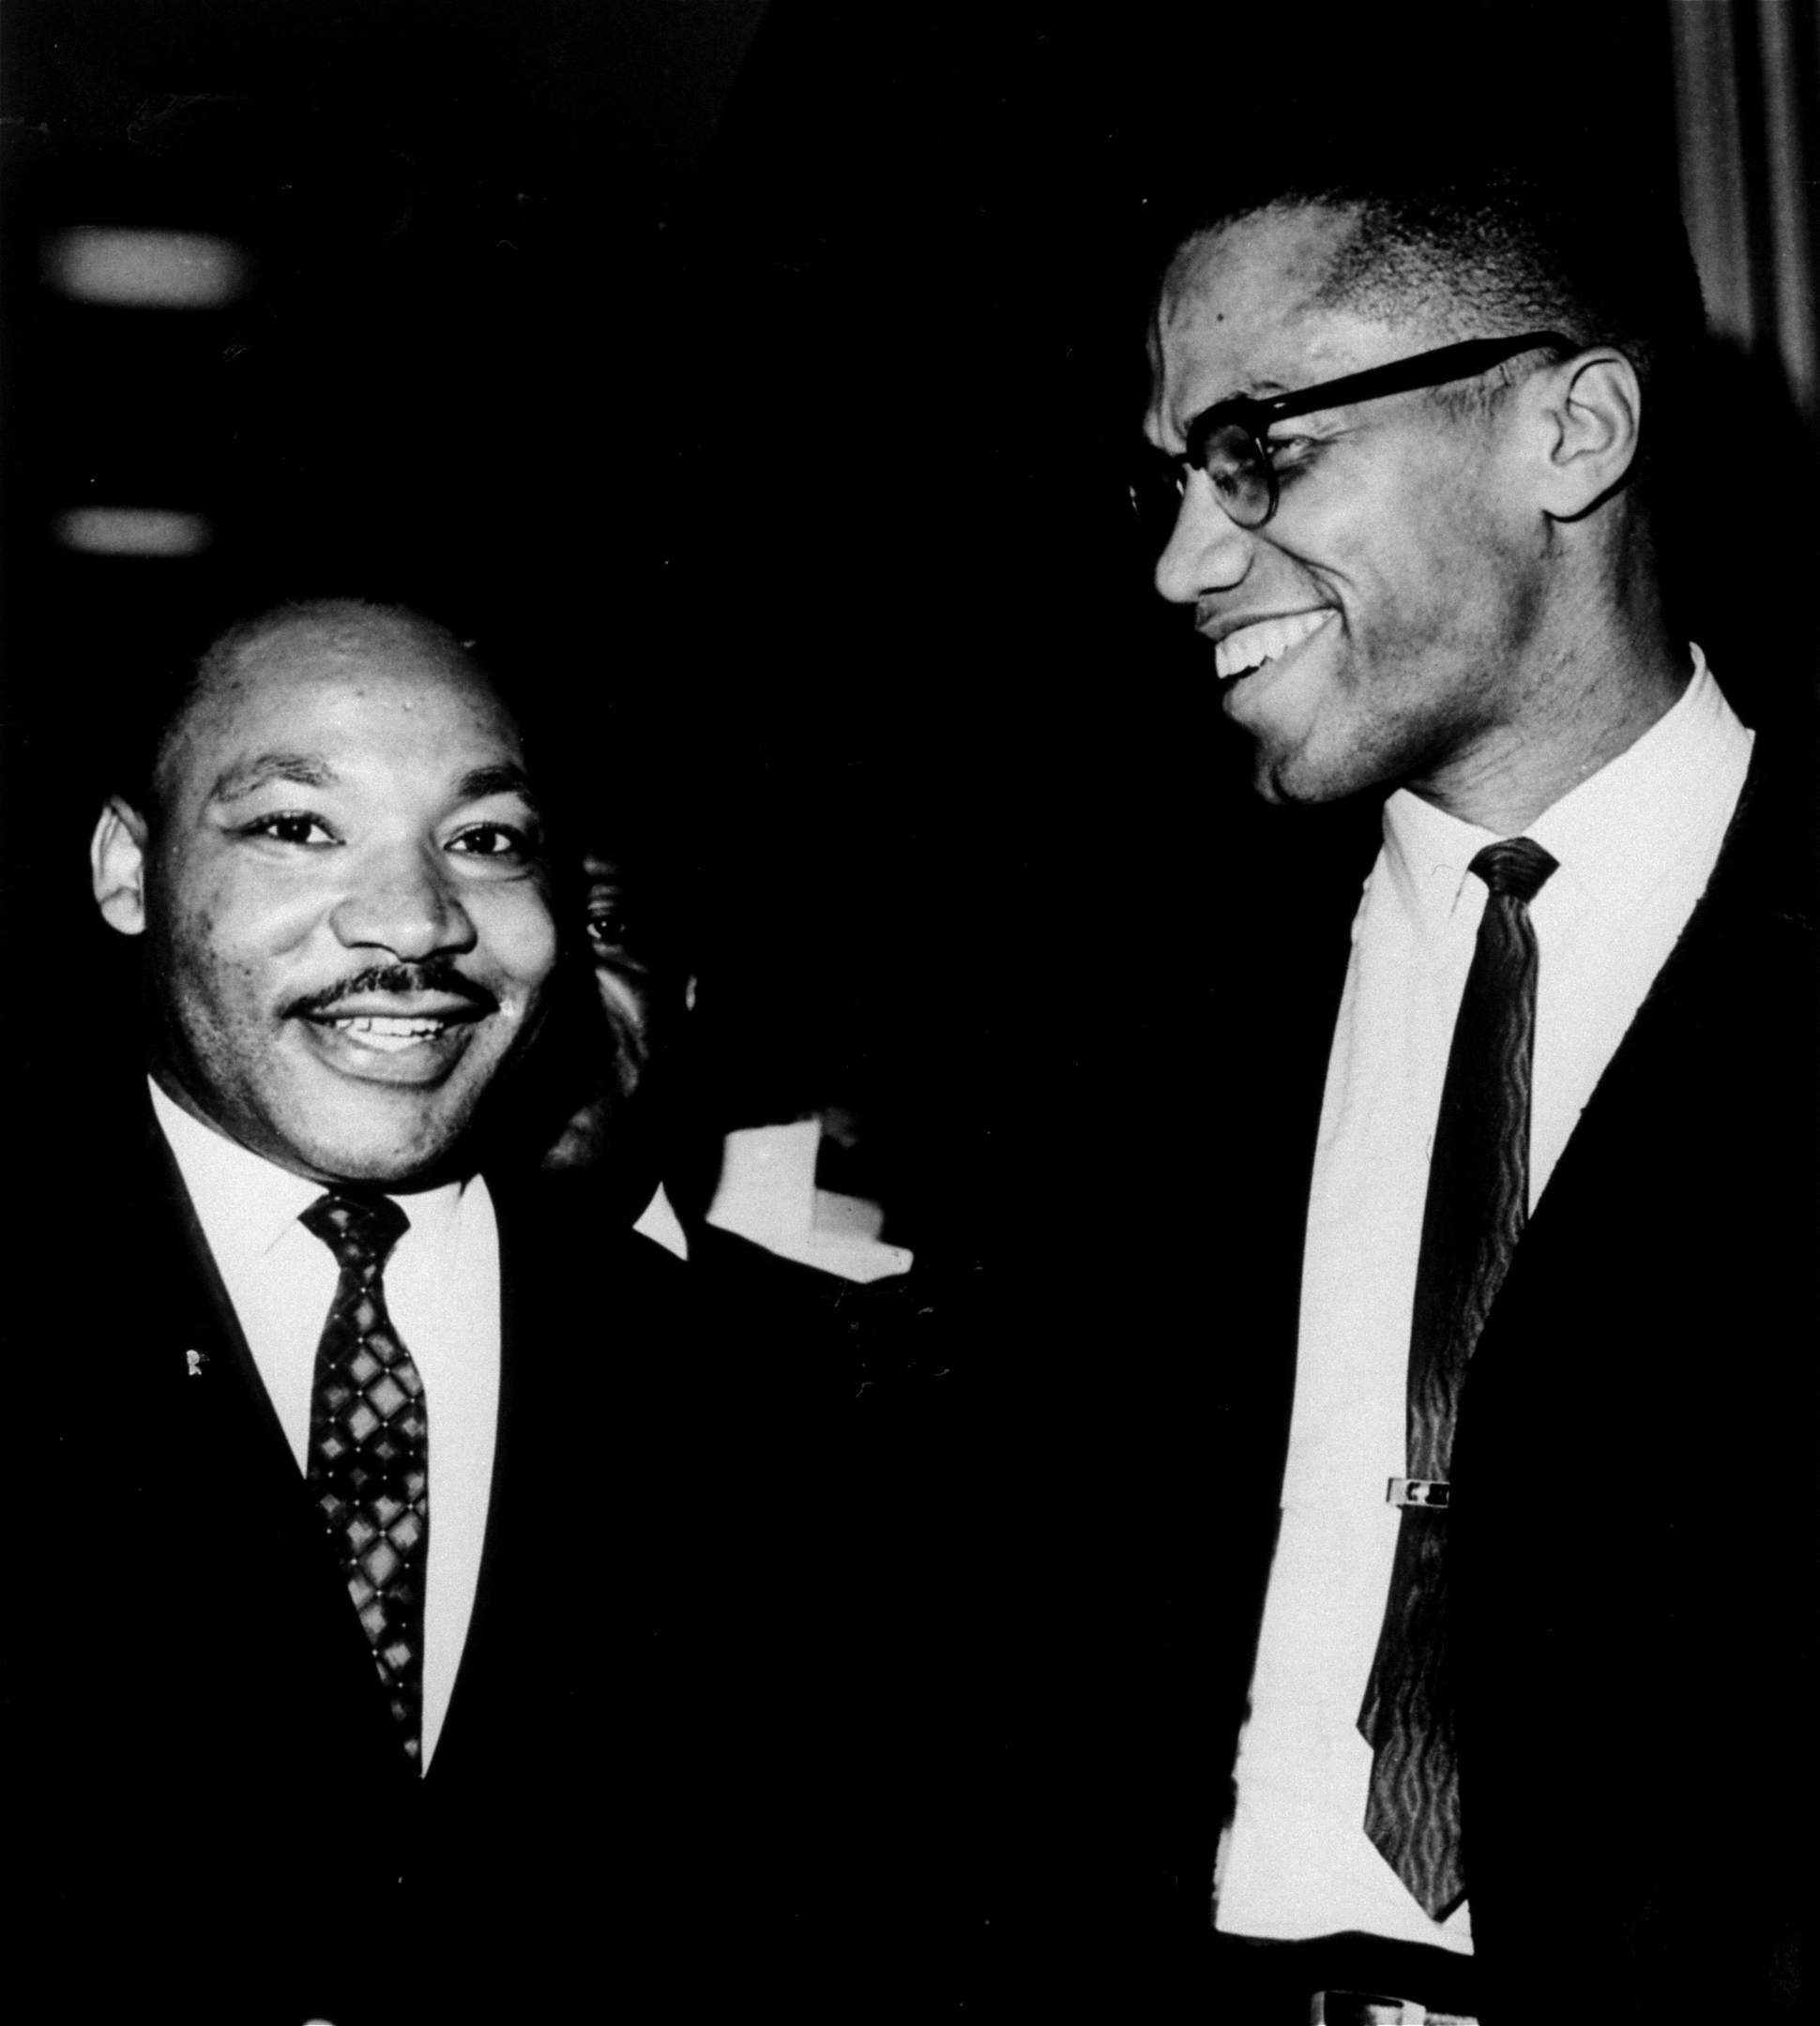 The Rev. Martin Luther King, Jr., left, and Malcolm X smile for photographers in this March 26, 1964 